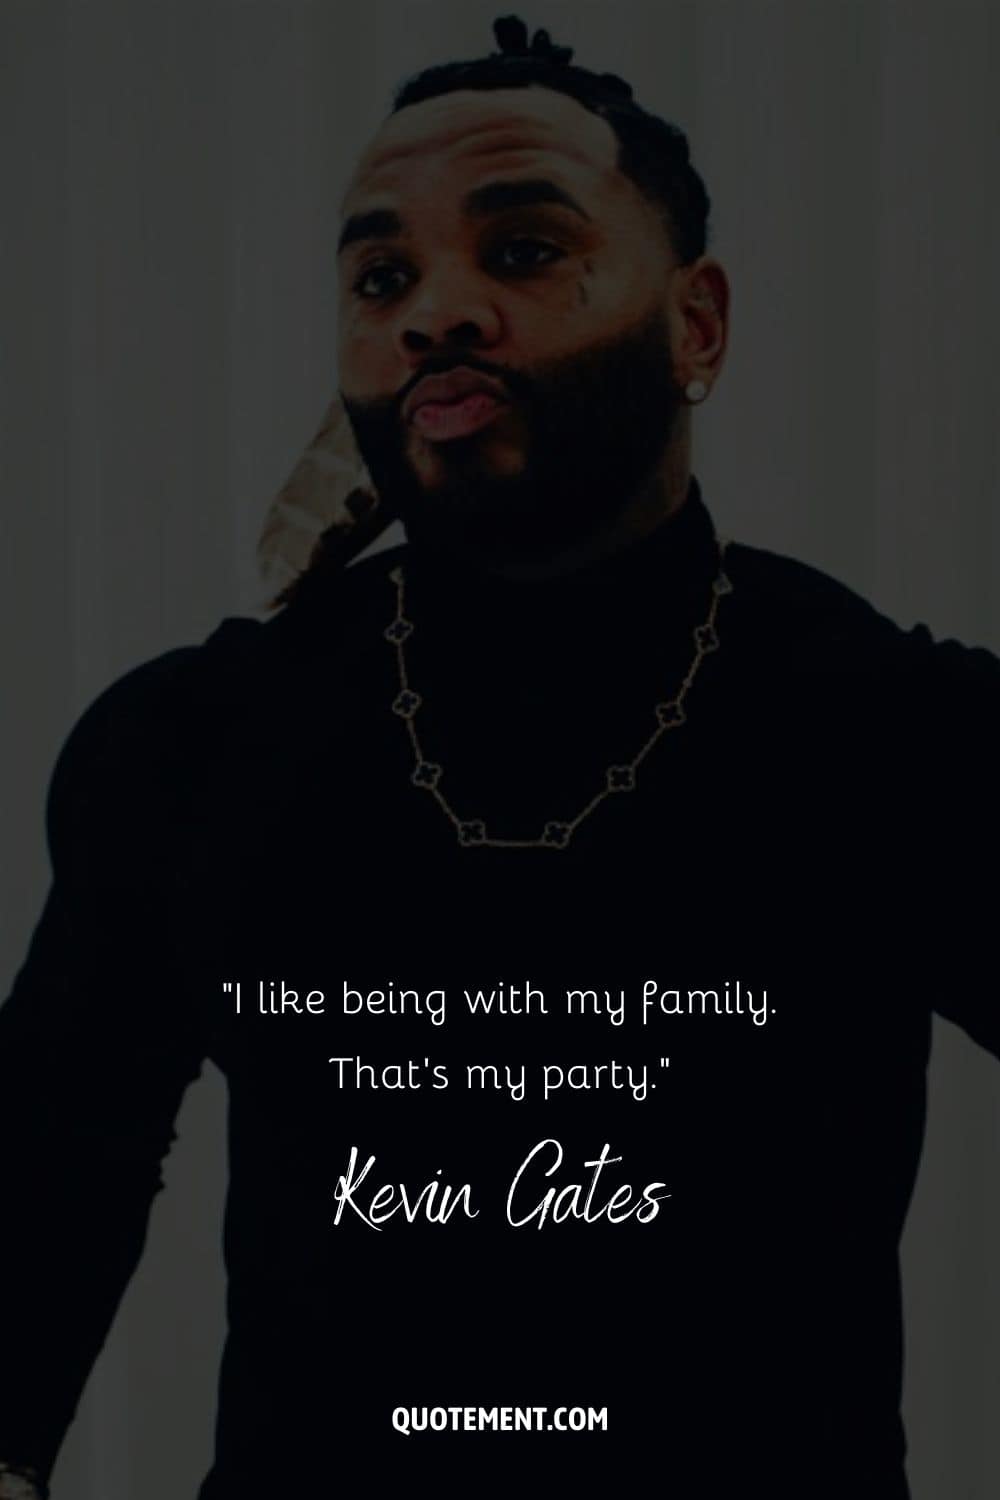 “I like being with my family. That’s my party.” – Kevin Gates